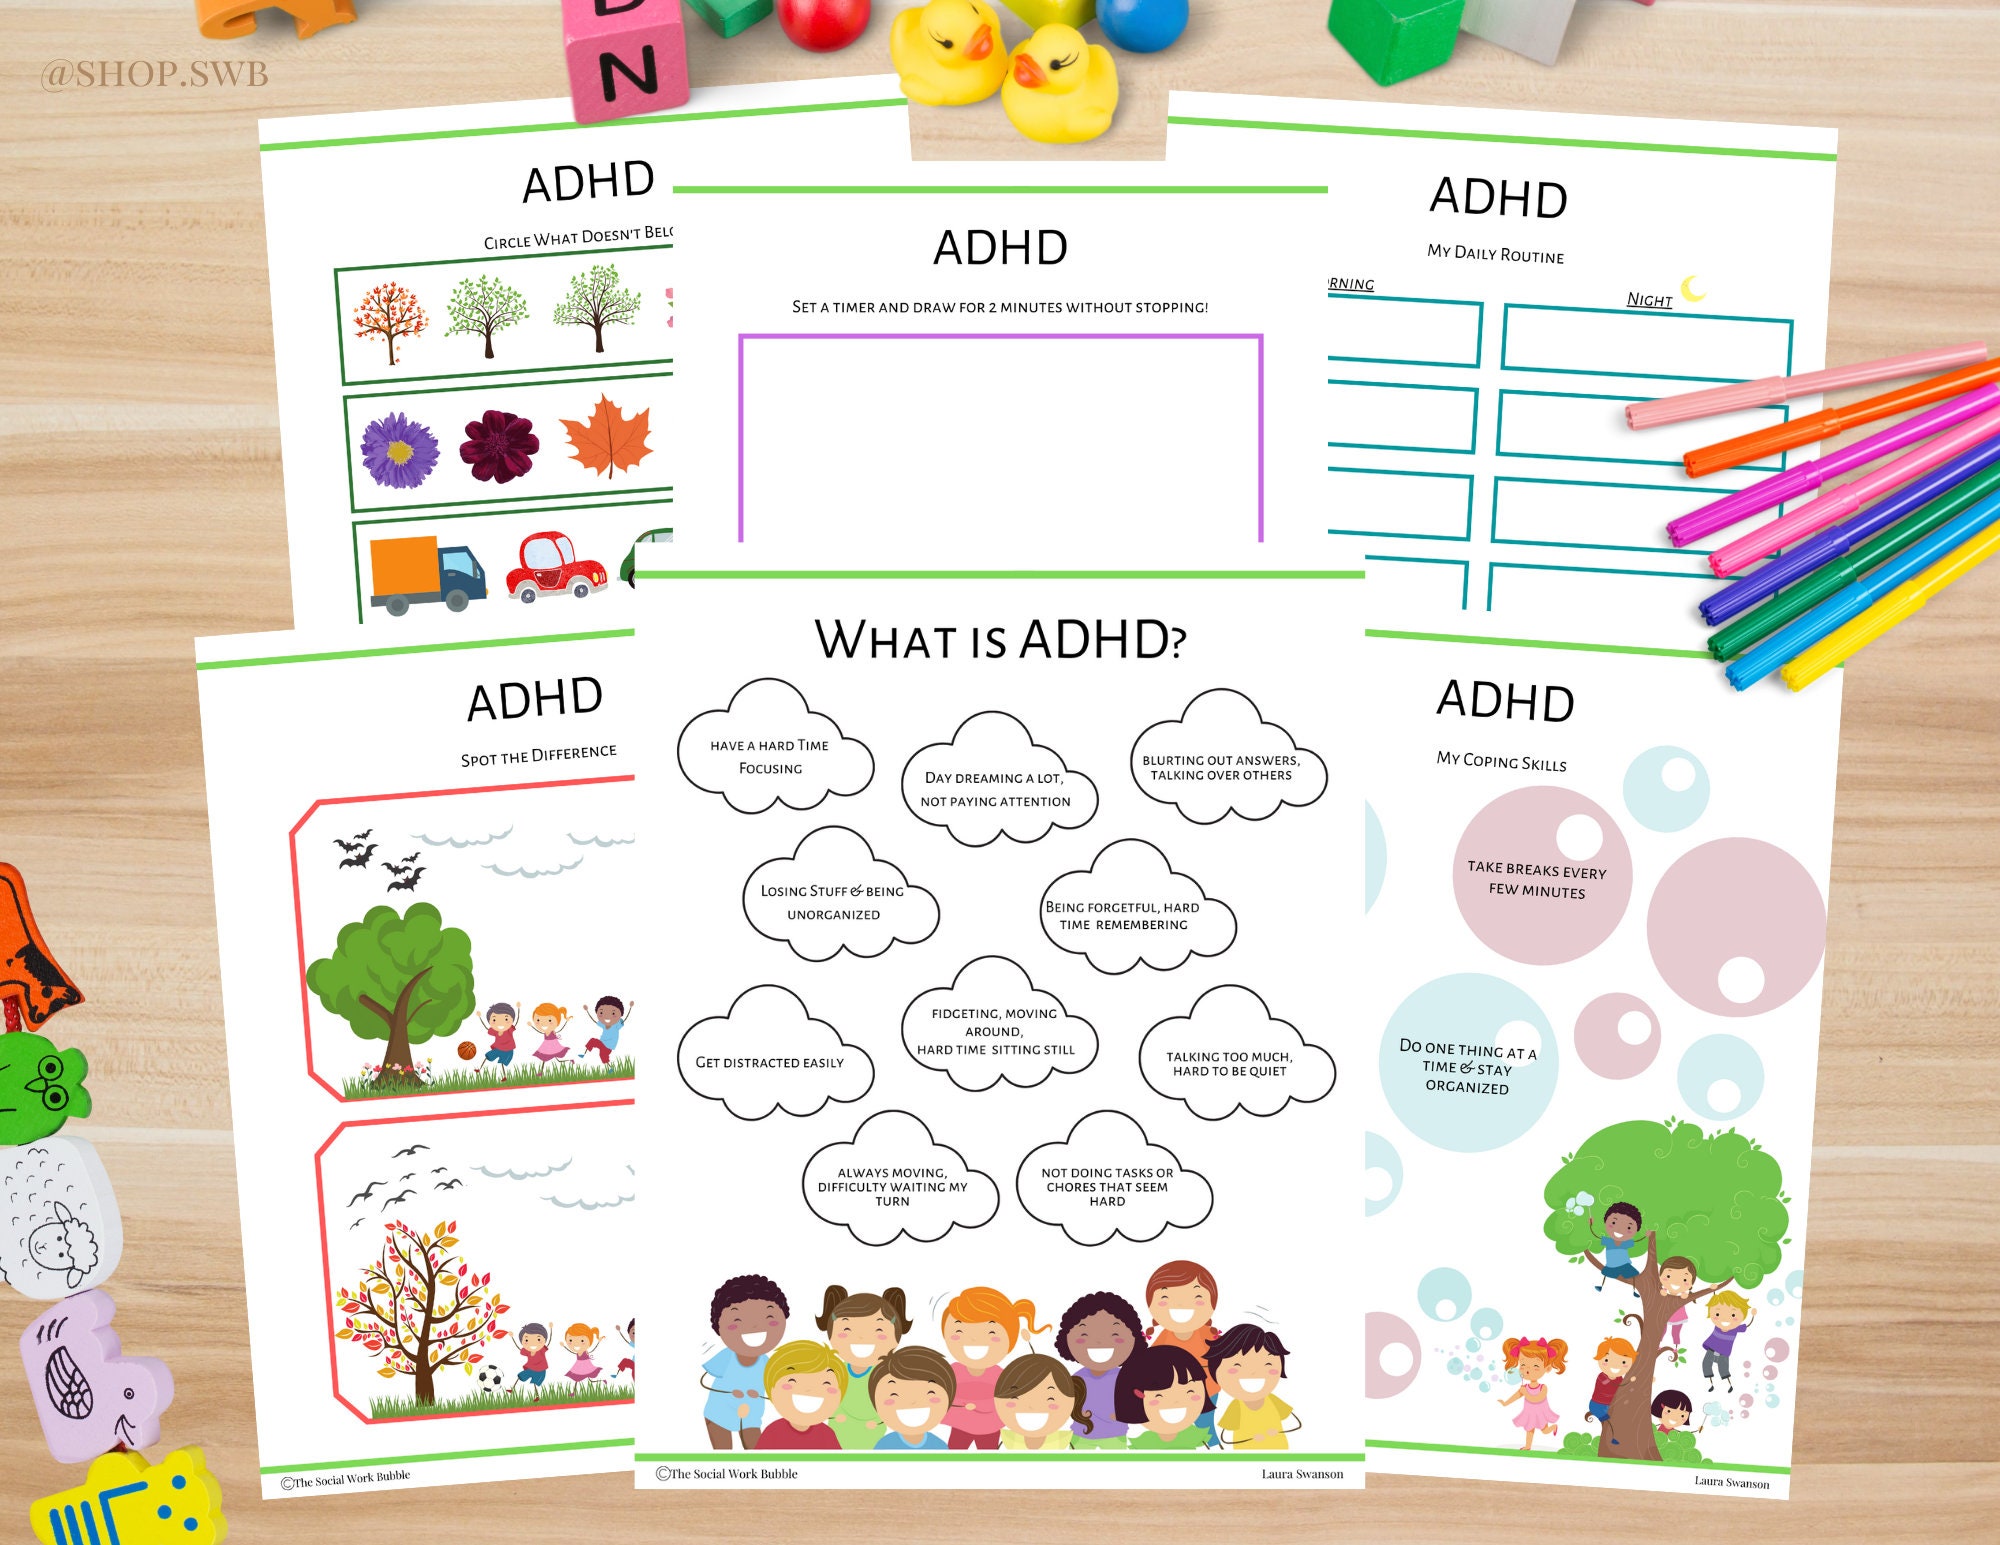 Add activities. Mental activities for children. Therapy for ADHD. Mental for Kids.